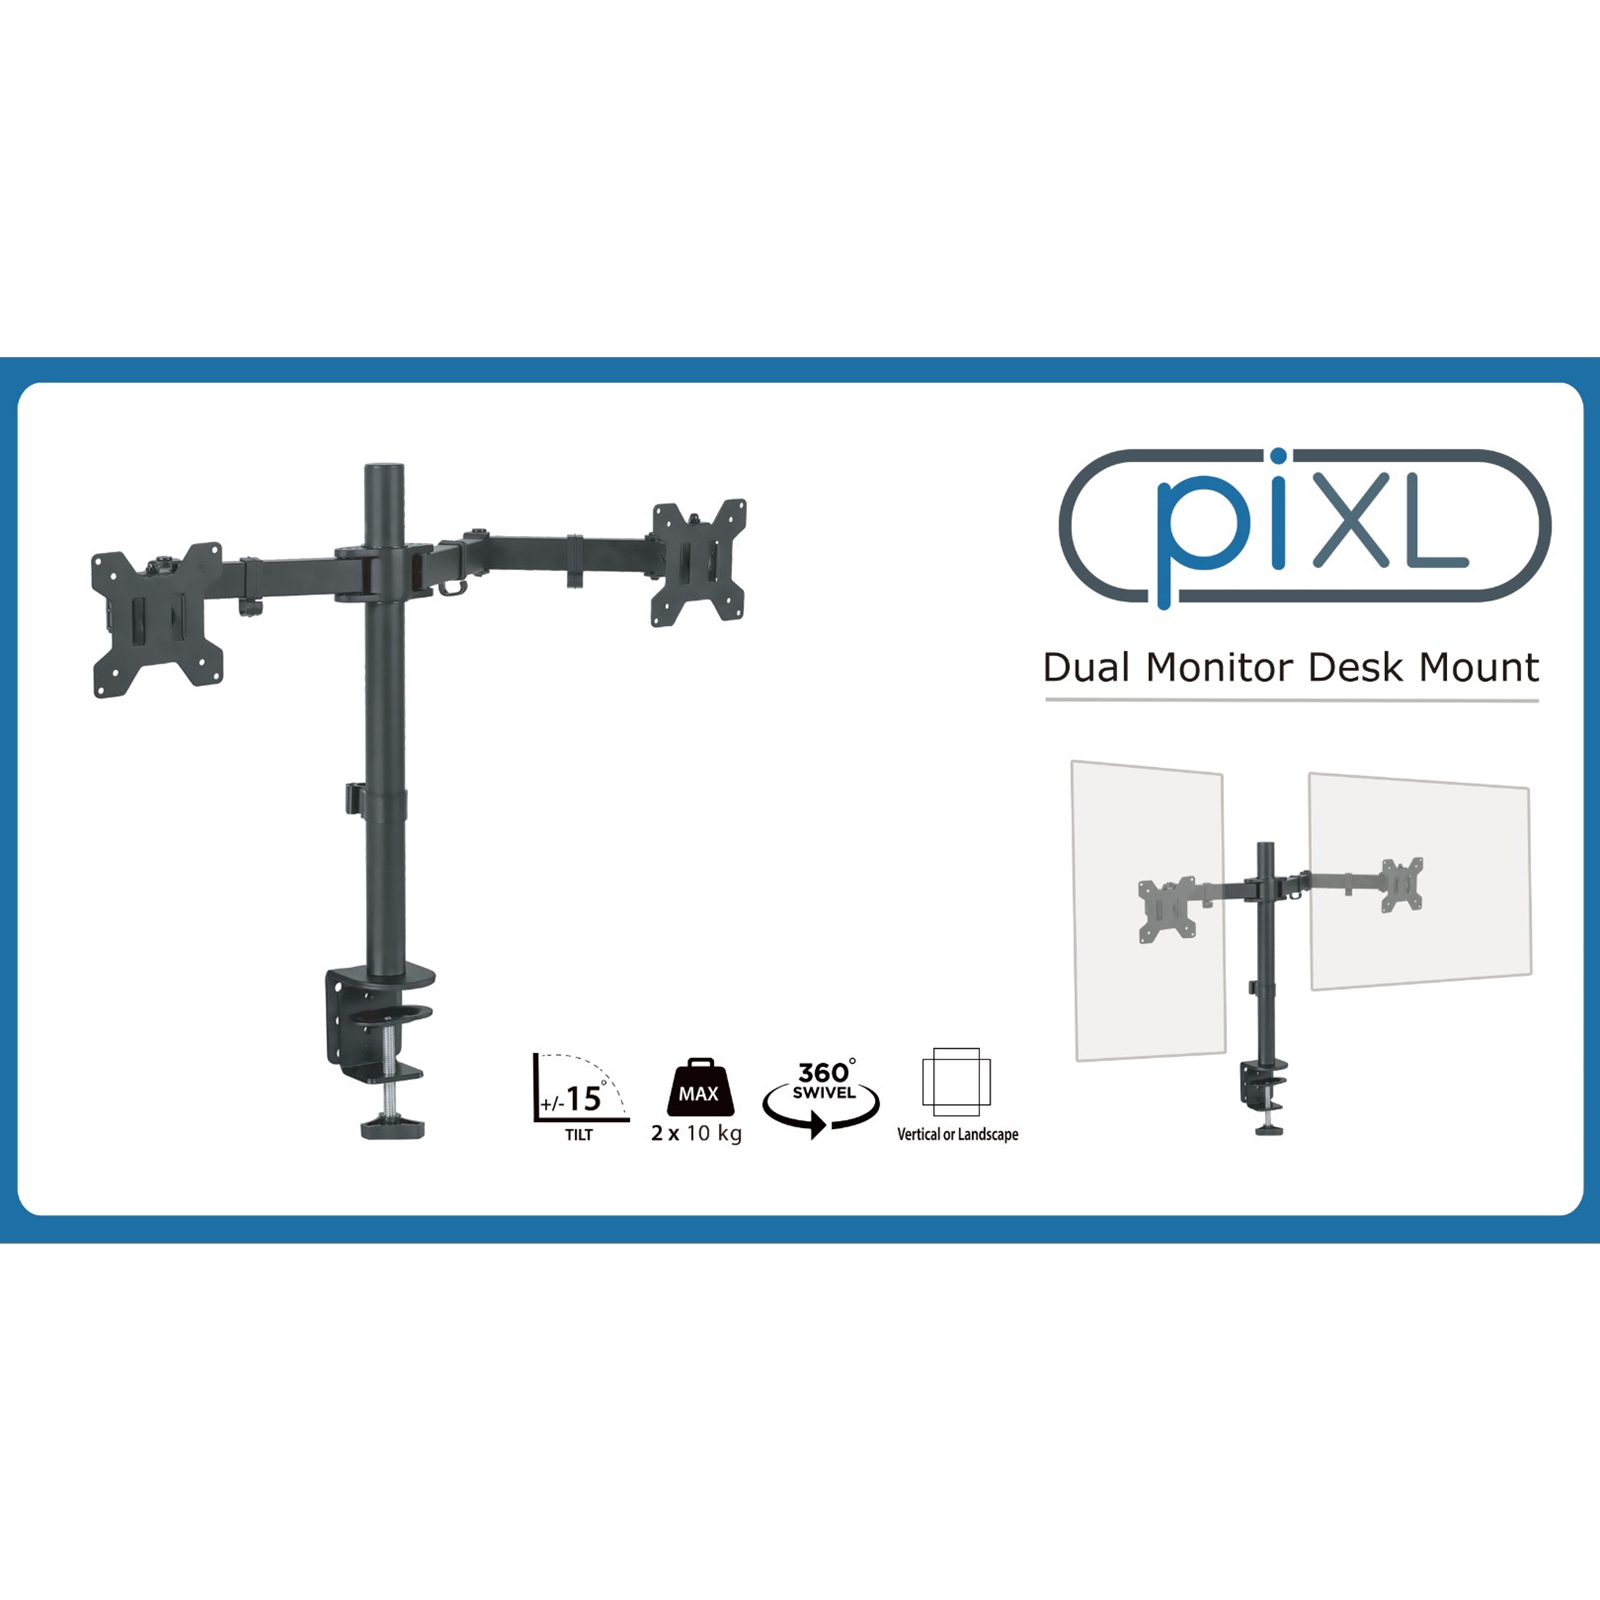 piXL Double Monitor Arm, For Upto 2x 27 inch Monitors, Desk Mounted, VESA dimensions of 75x75mm or 100x100mm, 180 Degrees Swivel, 15 Degrees Tilt, Weight Upto 10kg per screen, Built in Cable Management